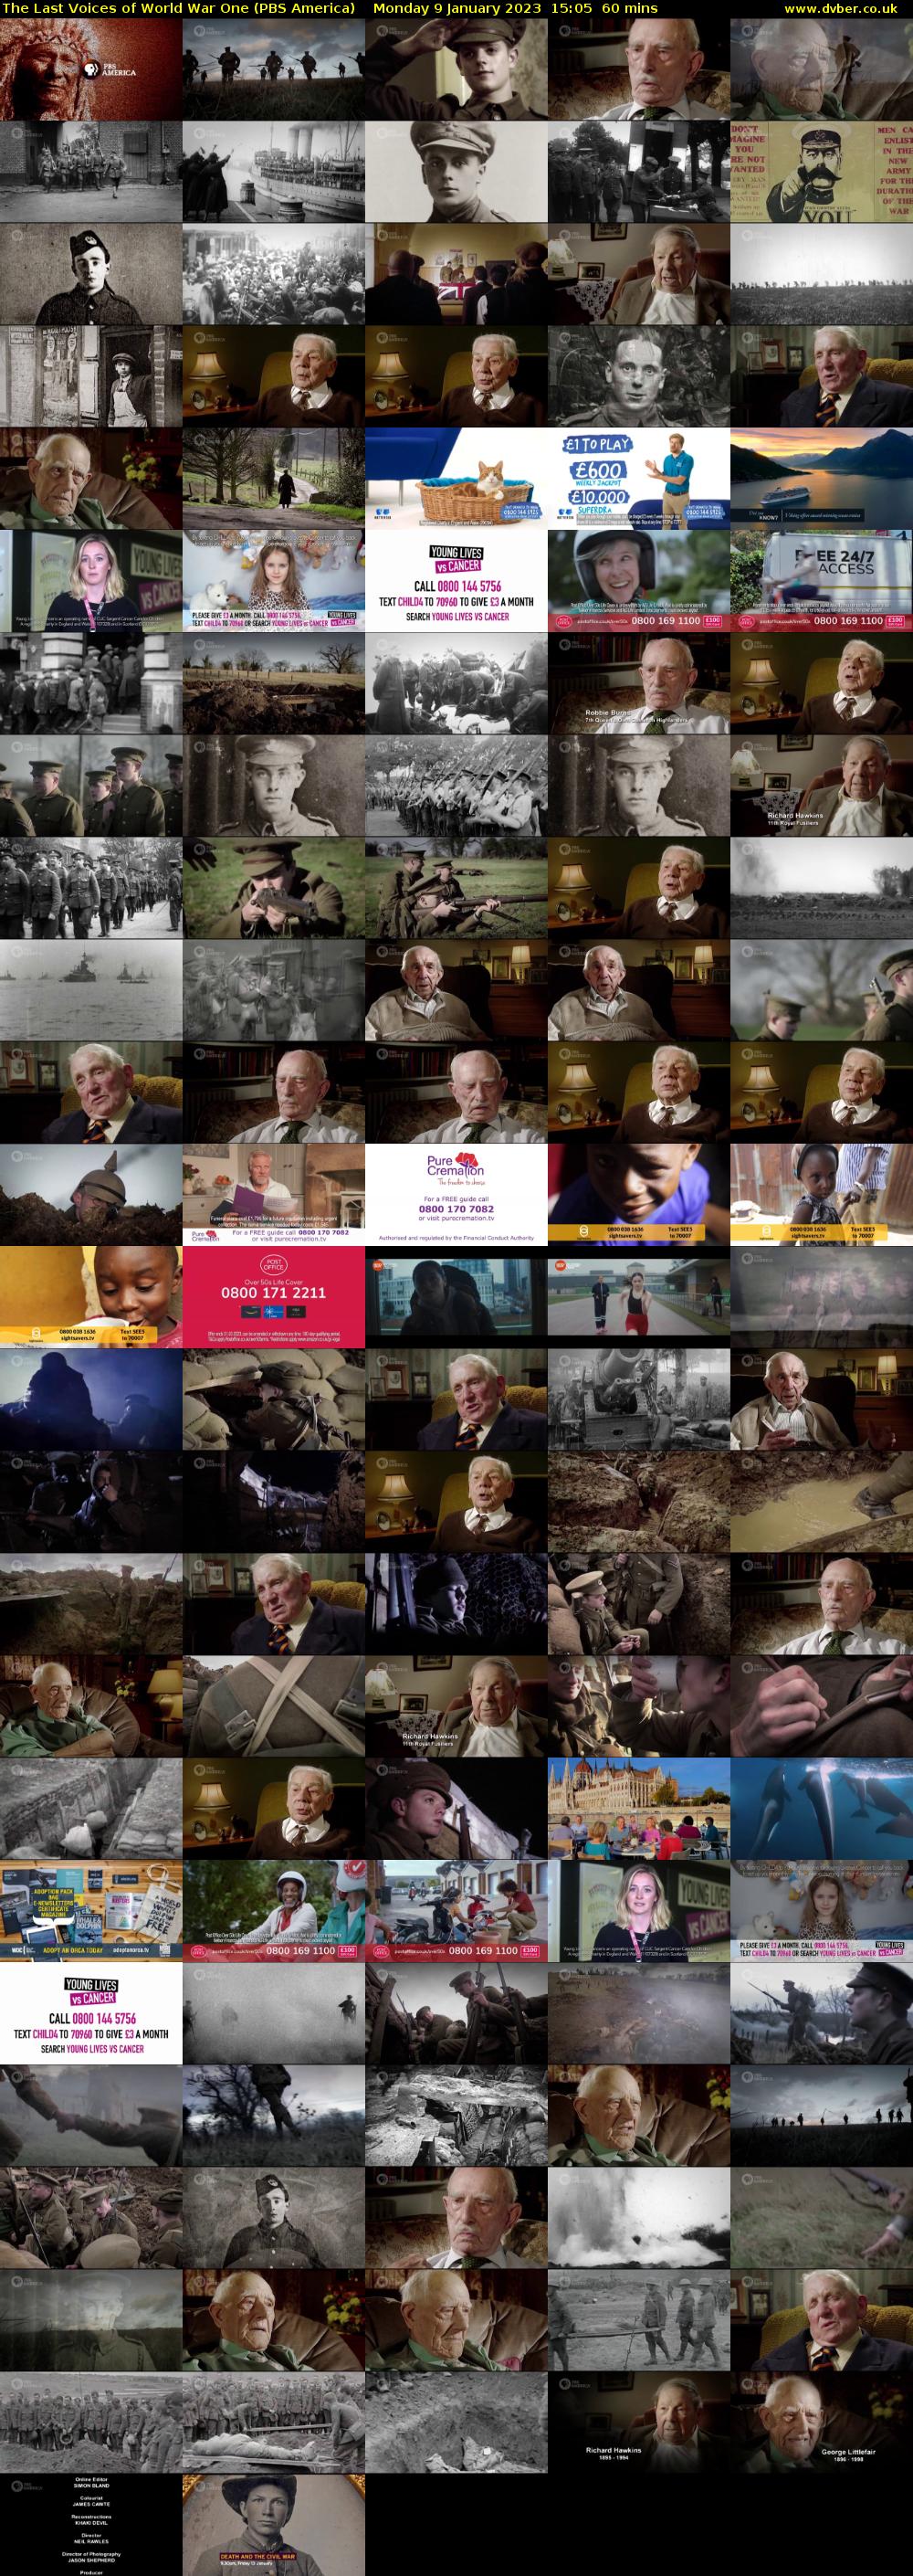 The Last Voices of World War One (PBS America) Monday 9 January 2023 15:05 - 16:05